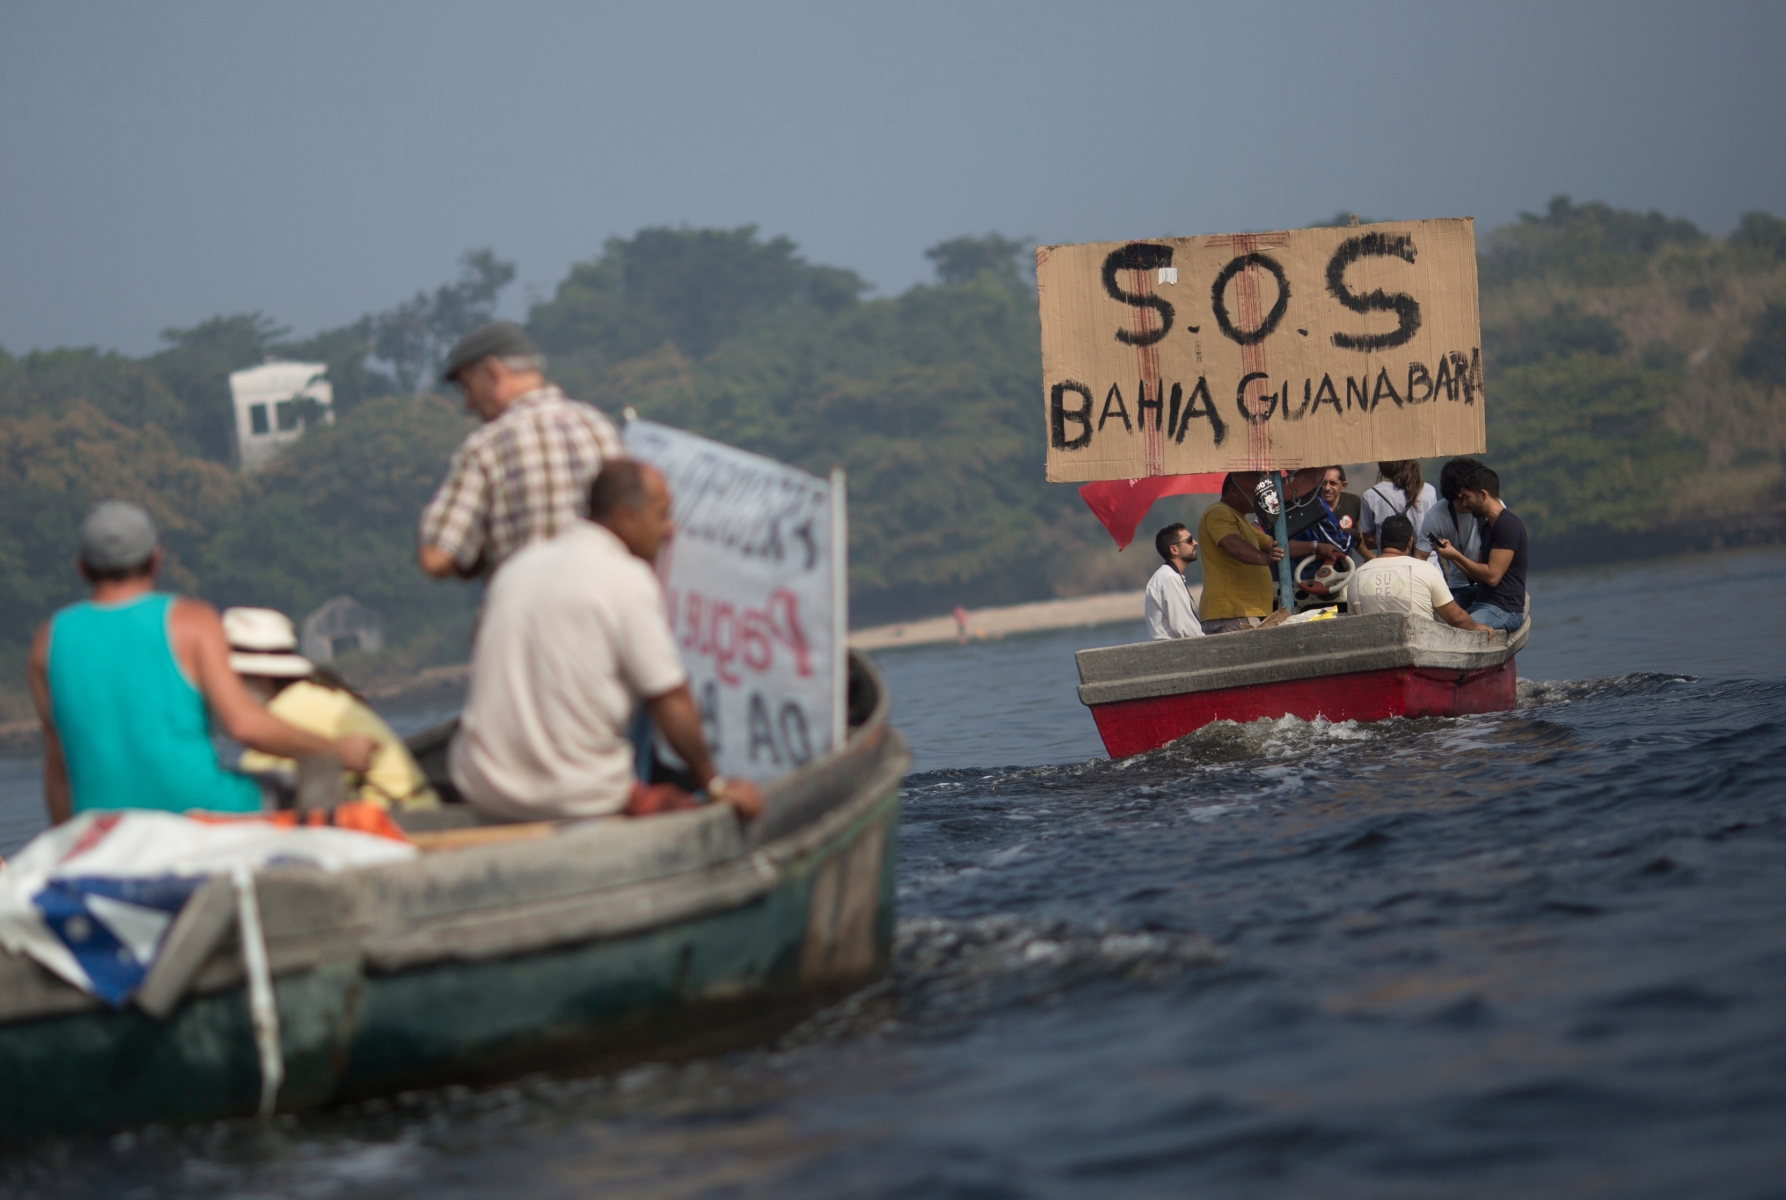 In this Sunday, July 3, 2016 photo, fishermen protest the pollution in the Guanabara bay, in Rio de Janeiro, Brazil. Rio state officials have acknowledged a real cleanup of Guanabara will take 20 years after organizers promised to do it for the Olympics, with the city still pouring at least half of its untreated sewage into its surrounding waters, including Guanabara. (AP Photo/Silvia Izquierdo) The Week That Was from Latin America Photo Gallery